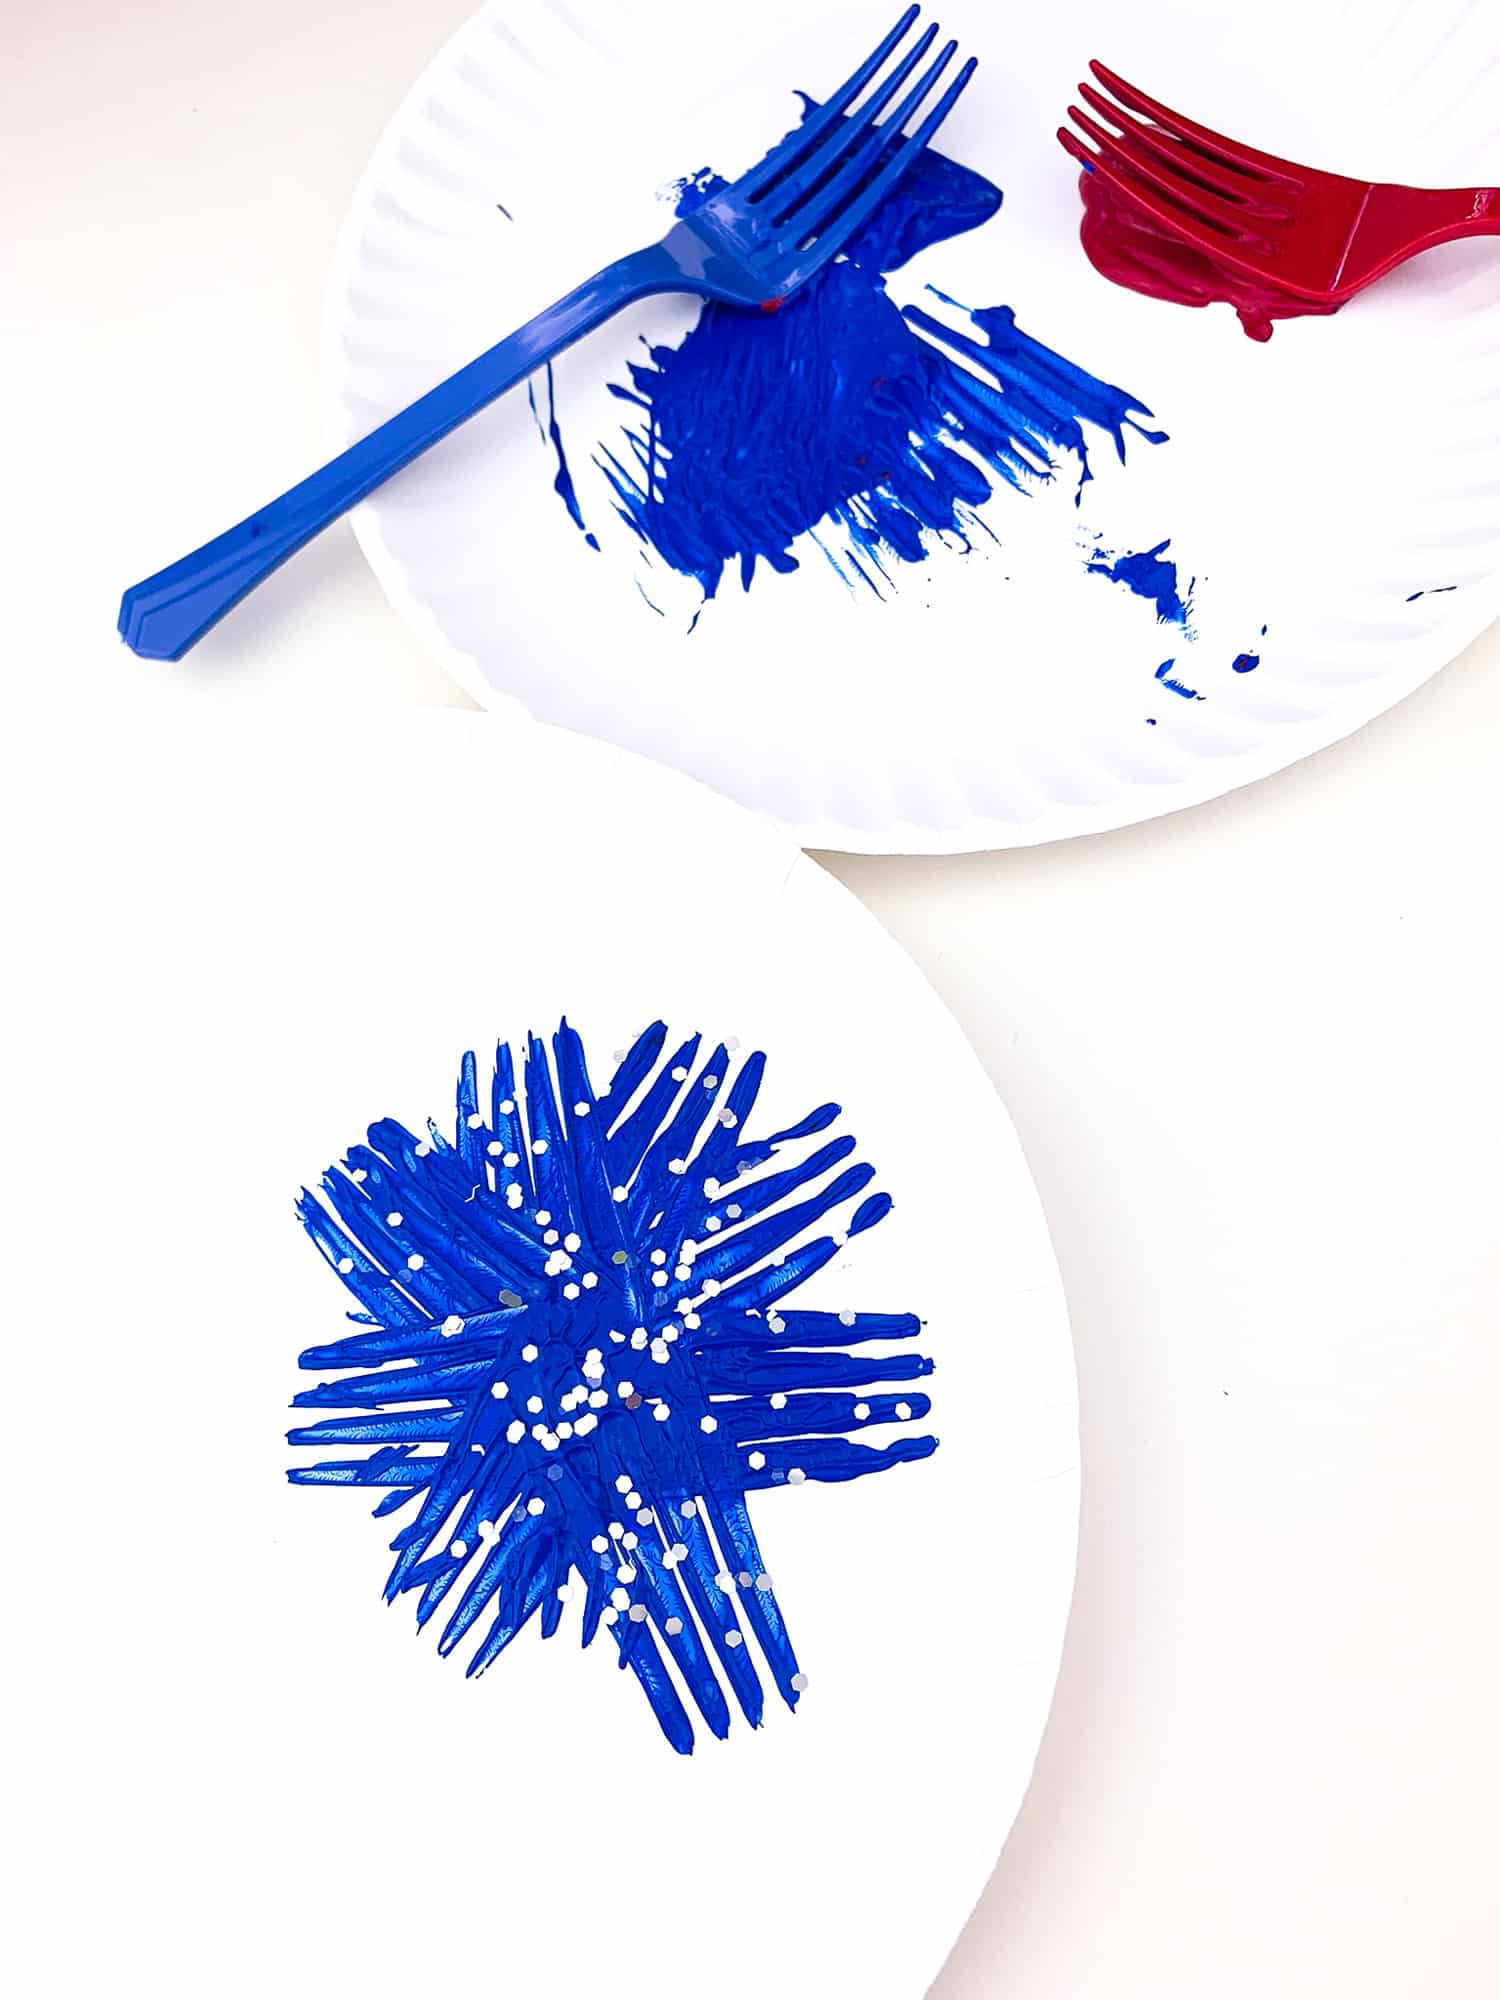 finished blue firework on paper plate